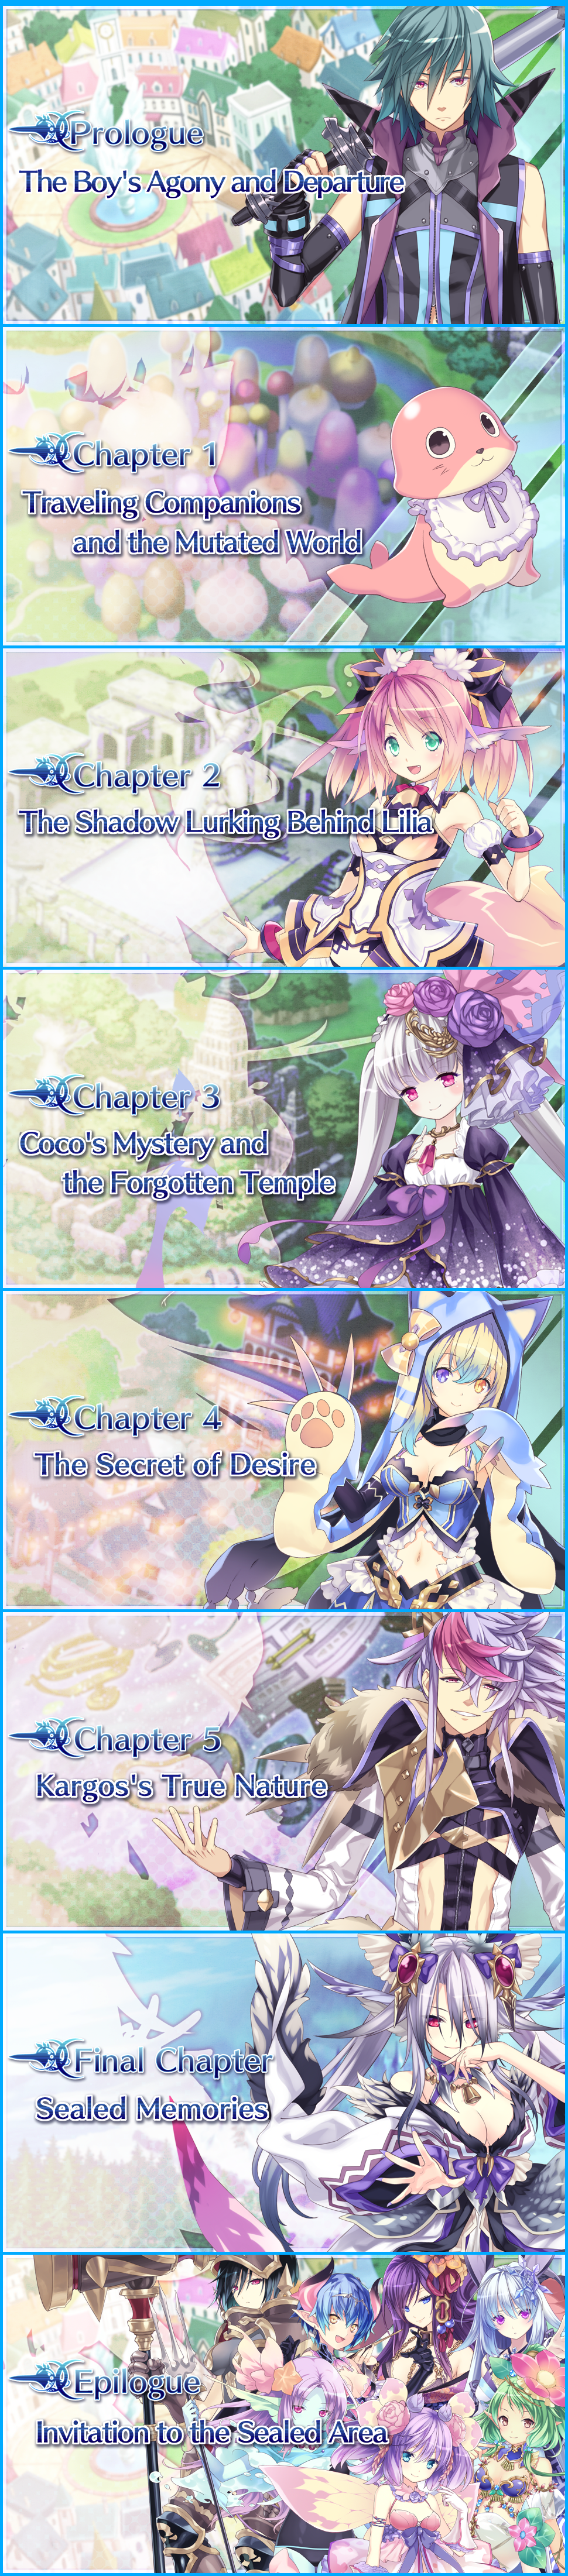 Moe Chronicle - Chapter Titles